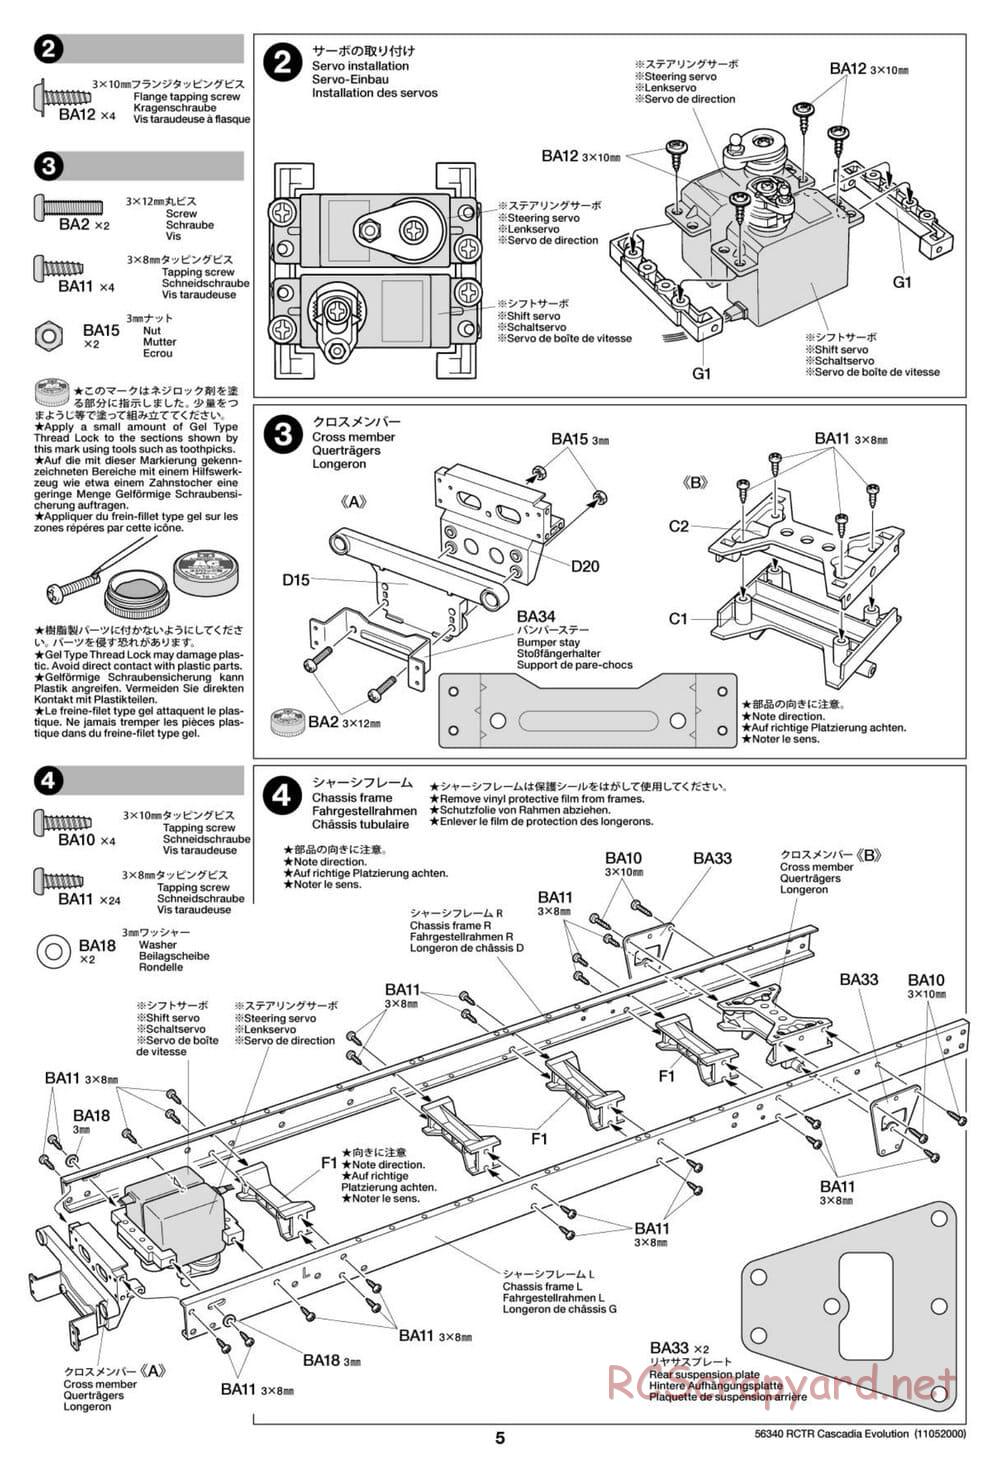 Tamiya - Freightliner Cascadia Evolution Tractor Truck Chassis - Manual - Page 5